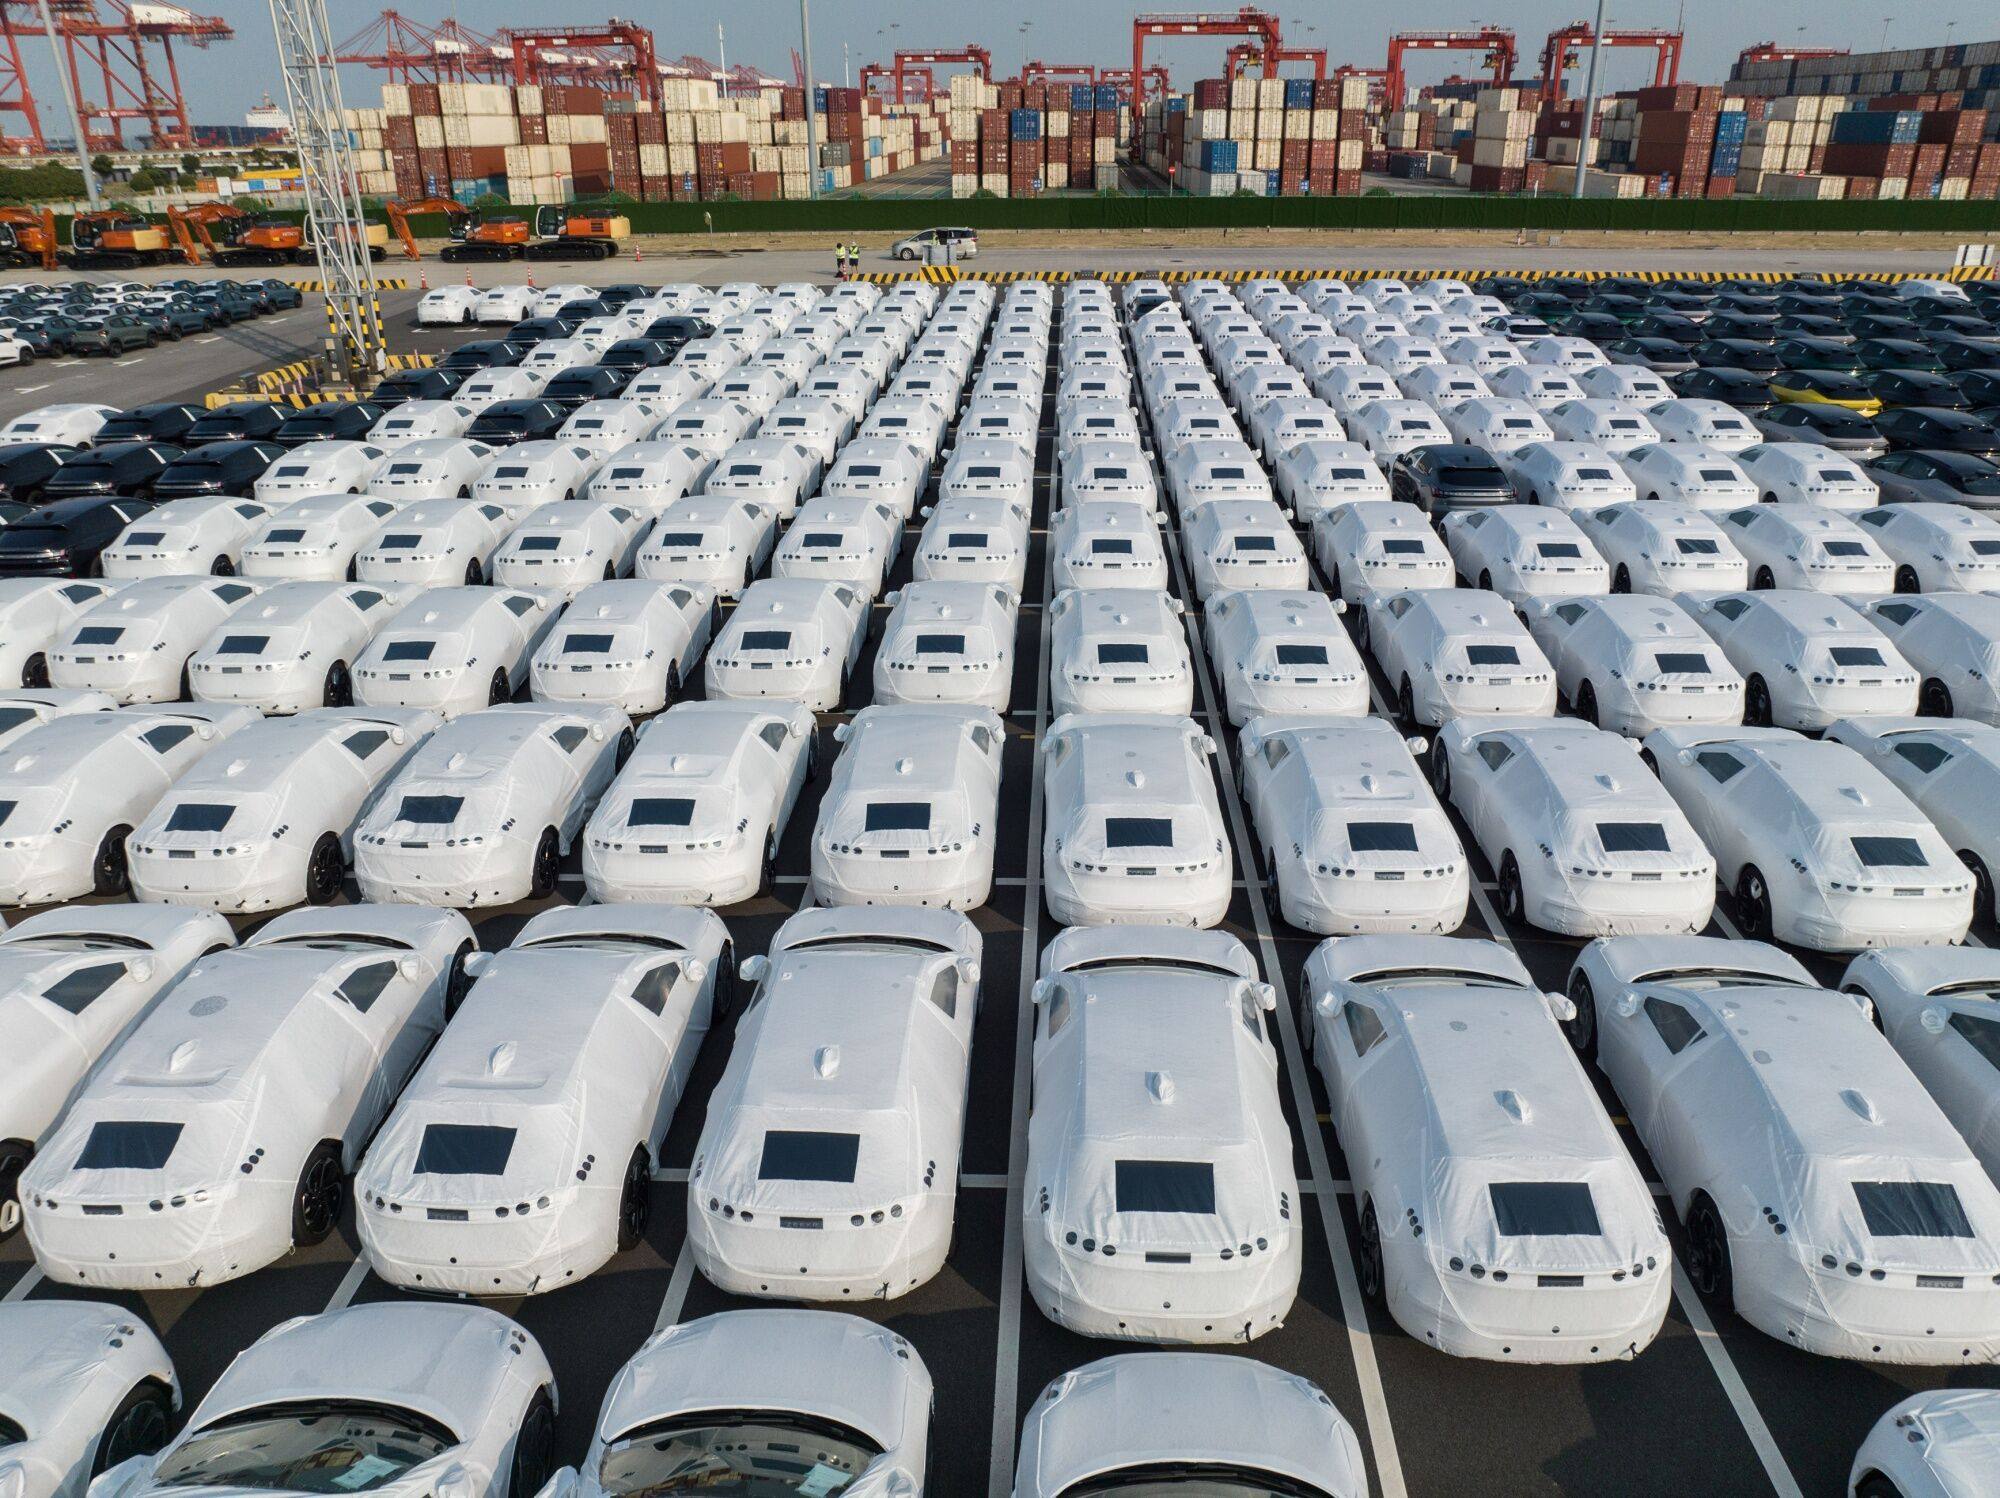 An EU document says if the EU waits to impose duties on imported EVs, its own manufacturers will suffer. Photo: Bloomberg